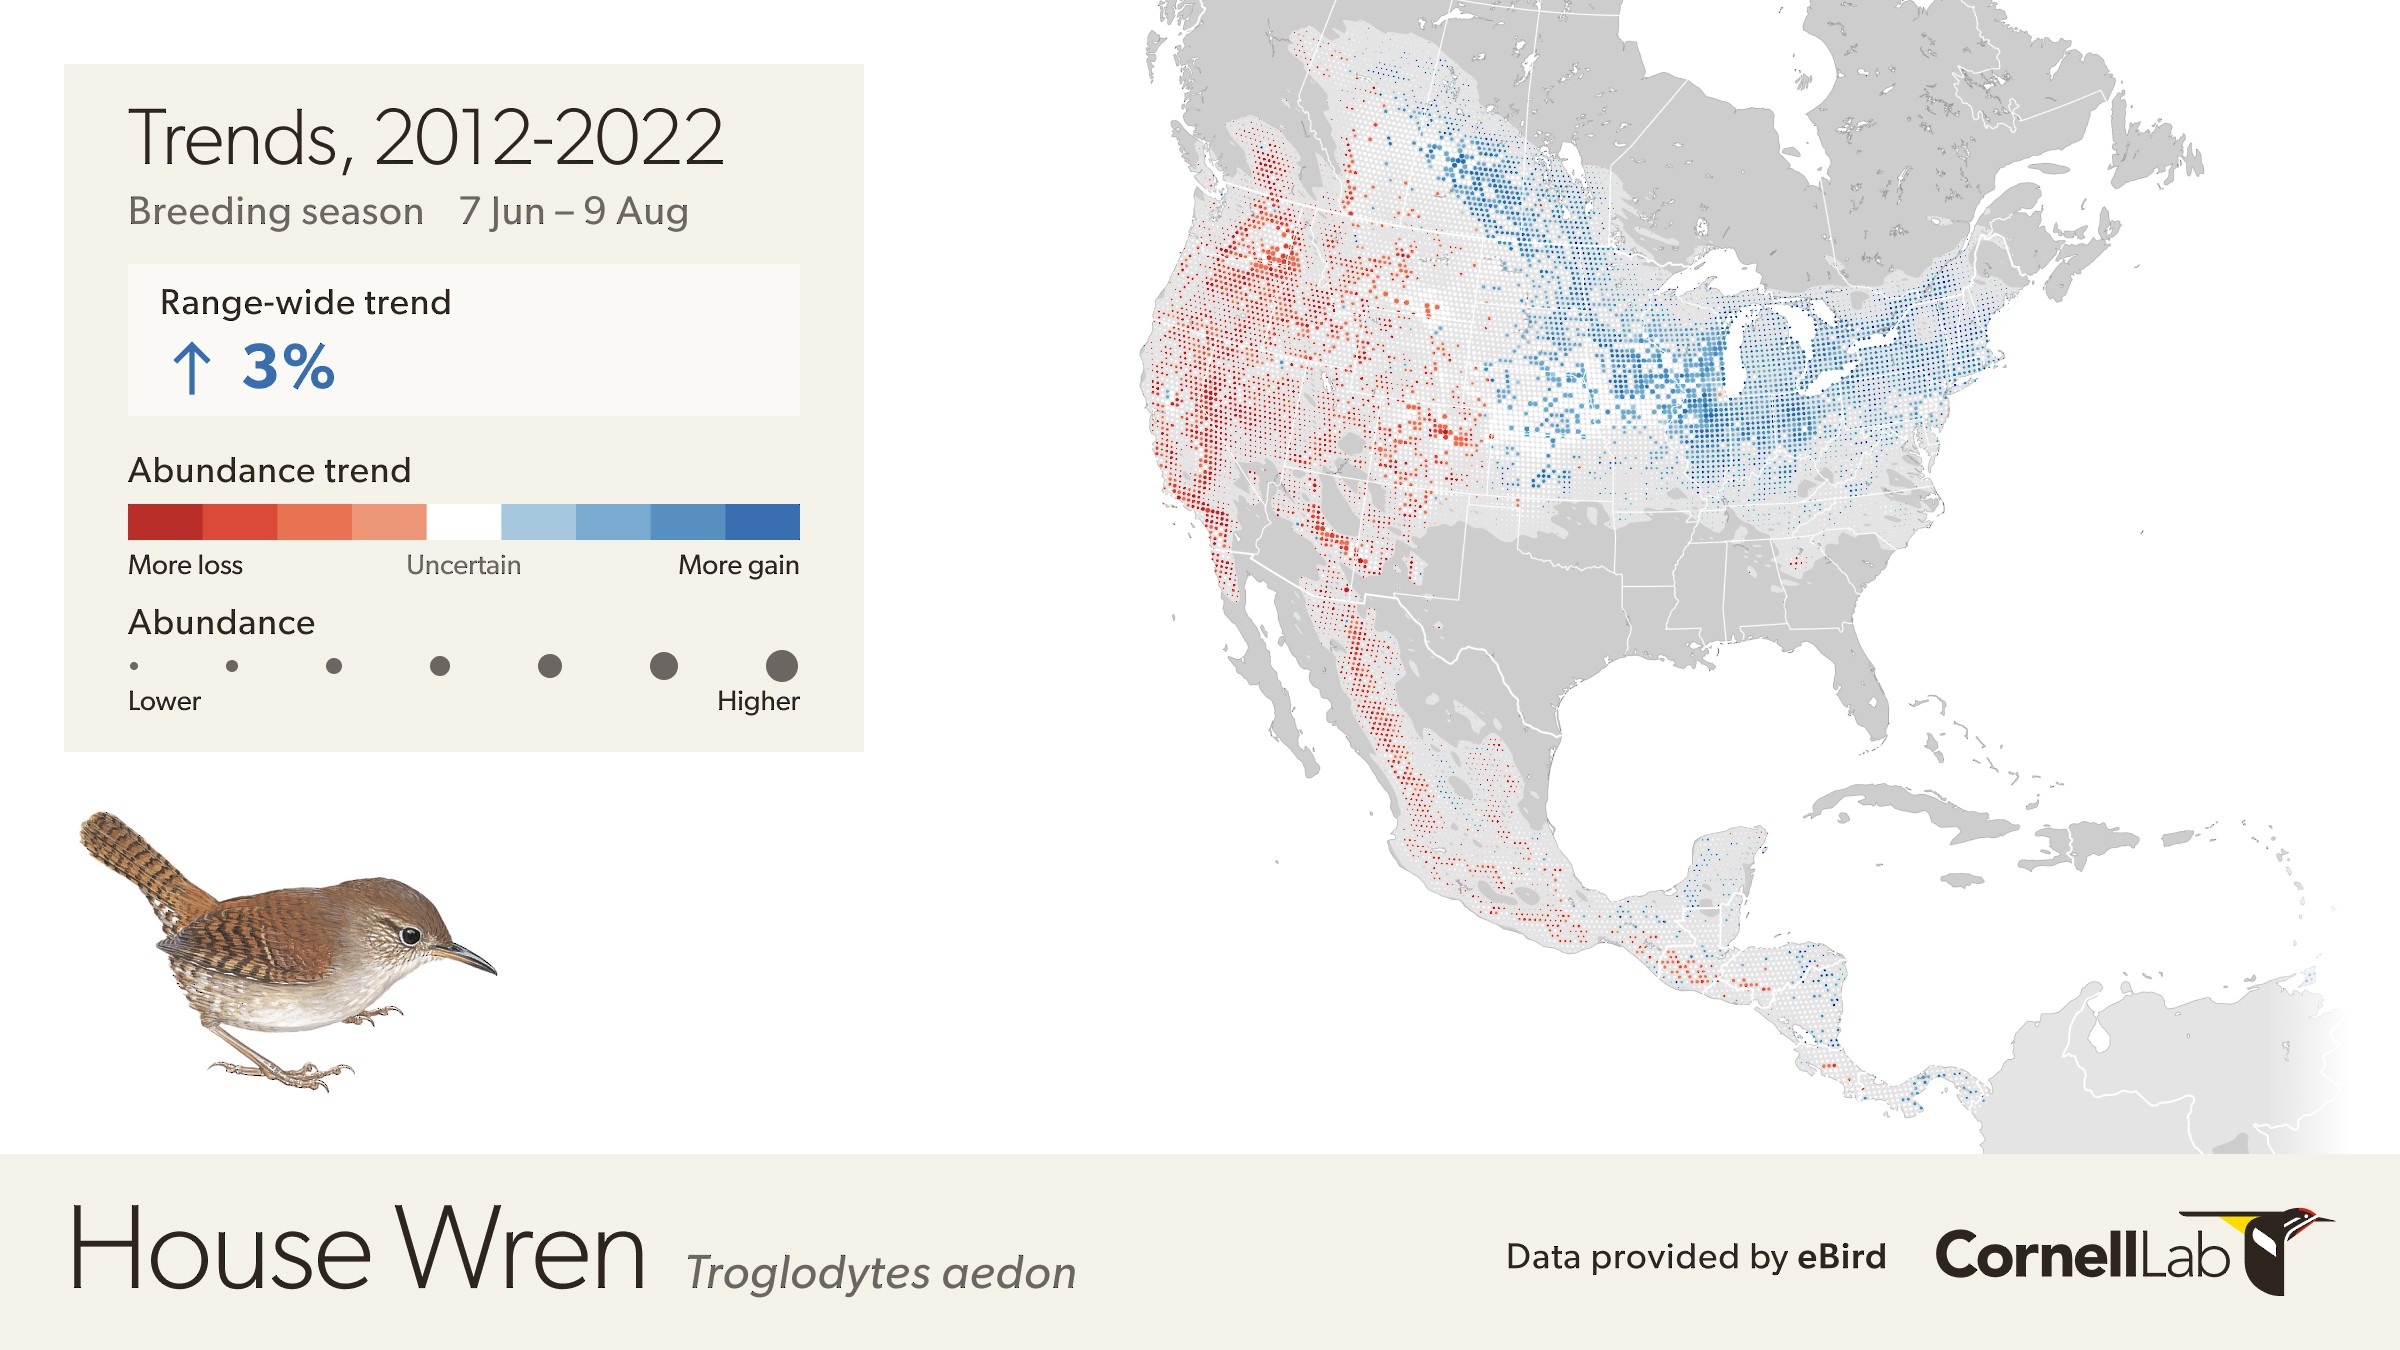 Trends map of House Wren showing much of the eastern U.S. with blue dots indicating an increasing trend and much of the western U. S. with red dots indicating a decreasing trend.